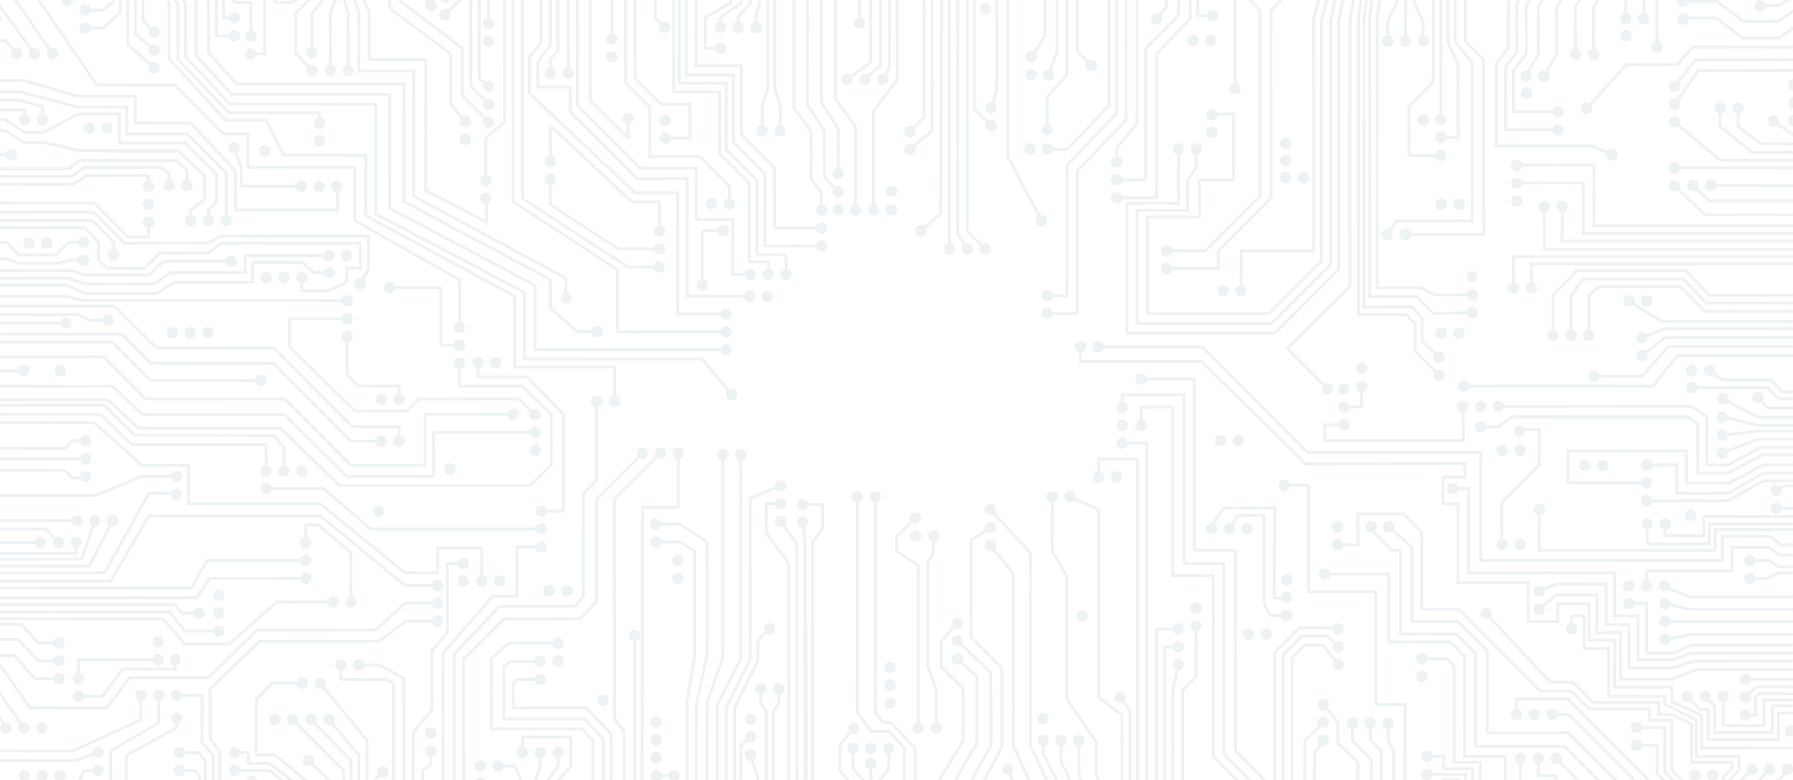 Level 3 Protection IT Solutions Circuit board background